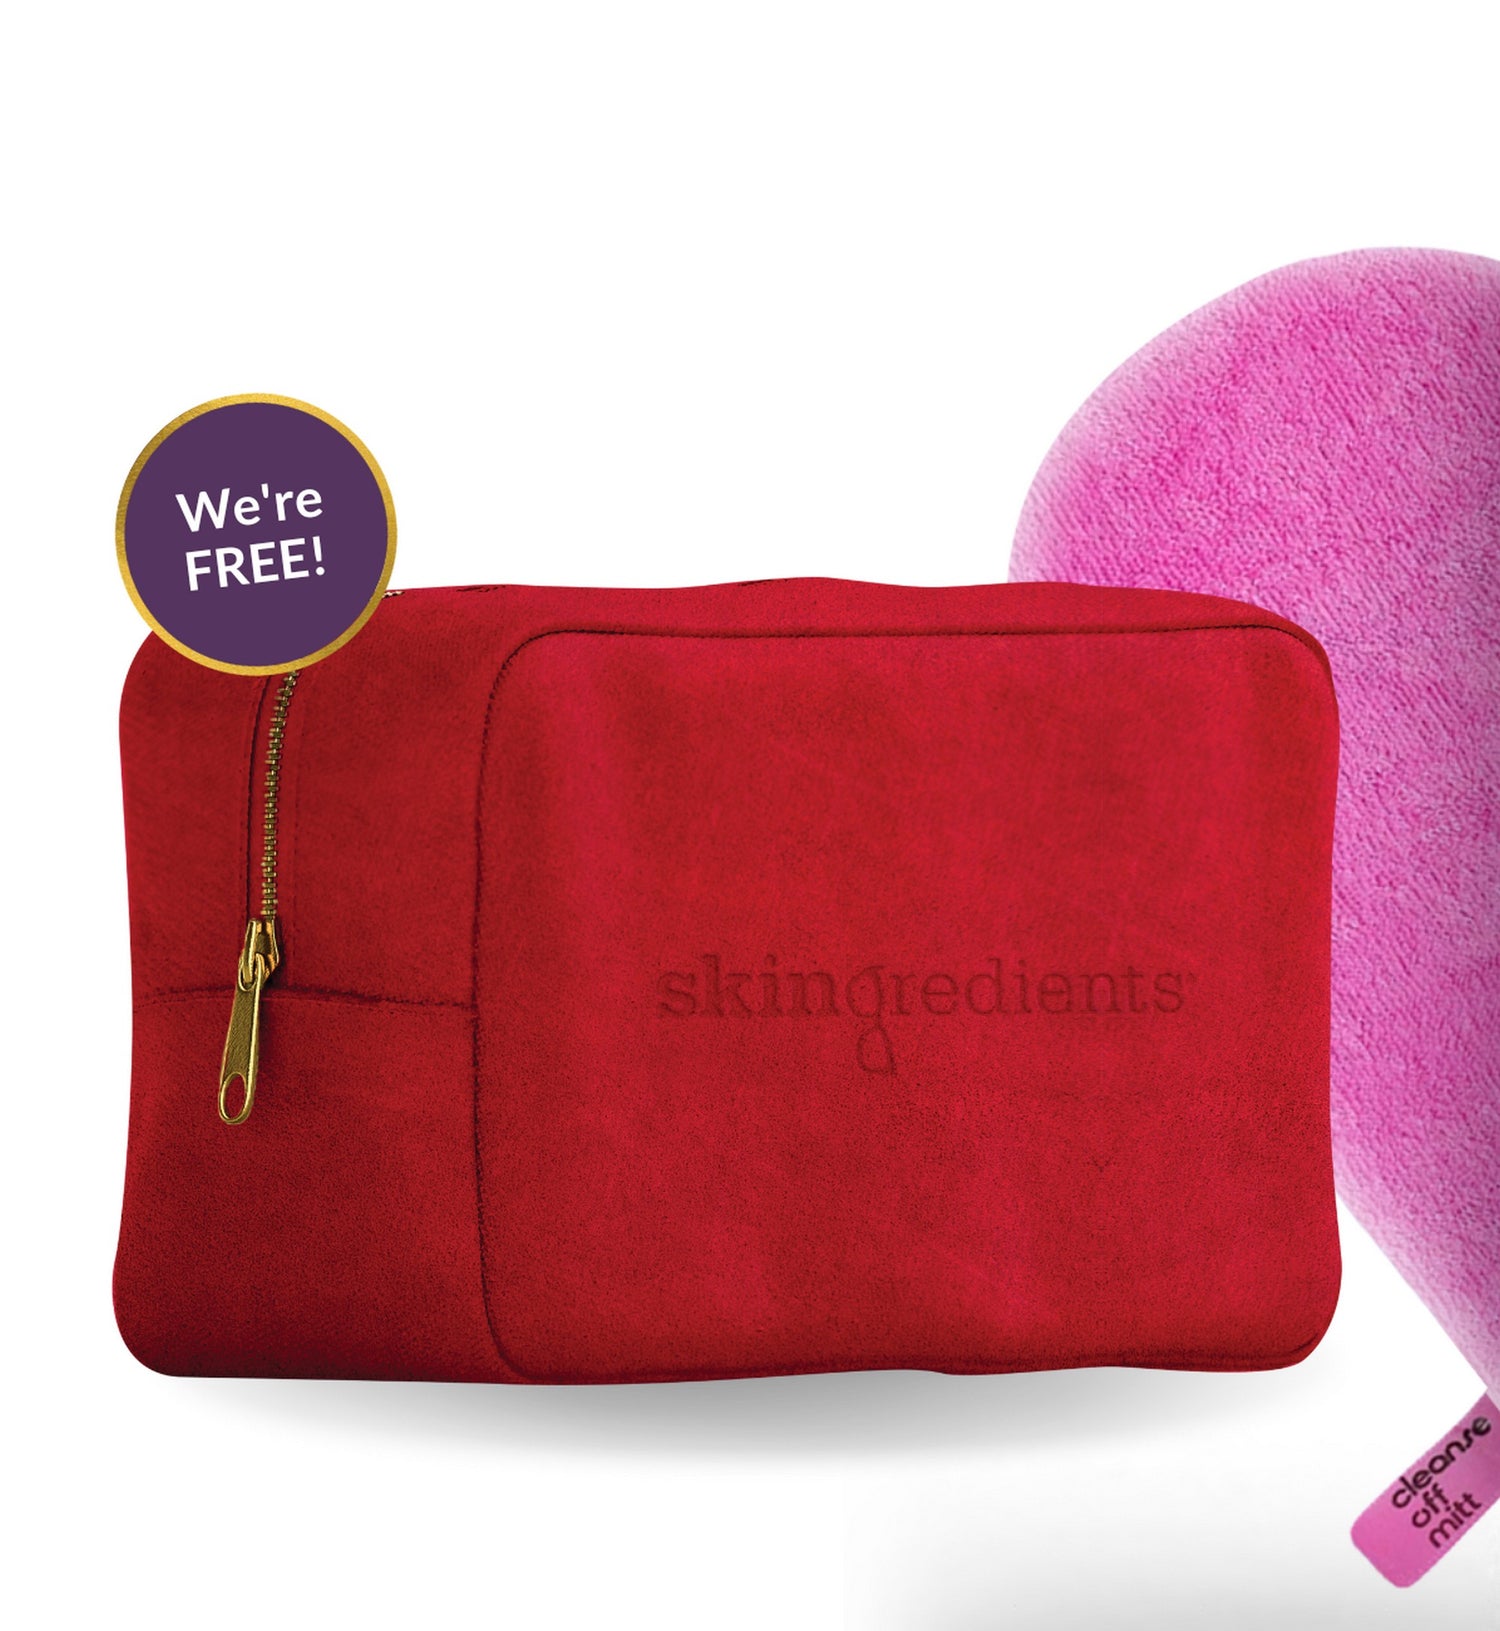 SKINGREDIENTS CLEANSE + GLOW 3 PIECE SET  POUCH